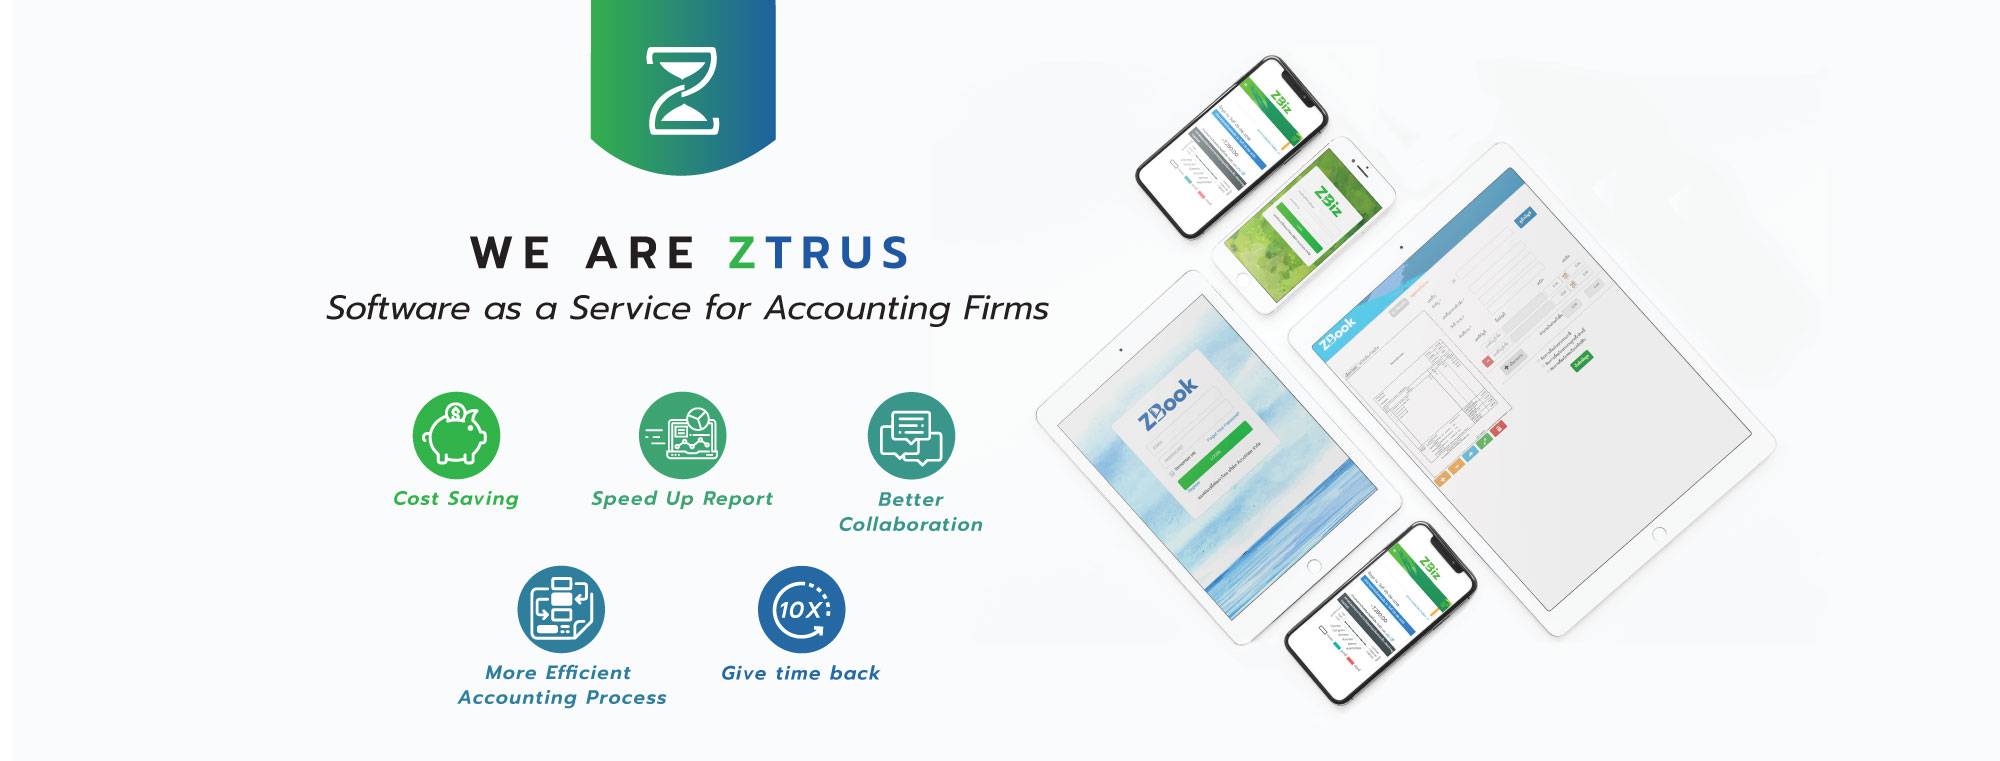 ztrus-software-it-review